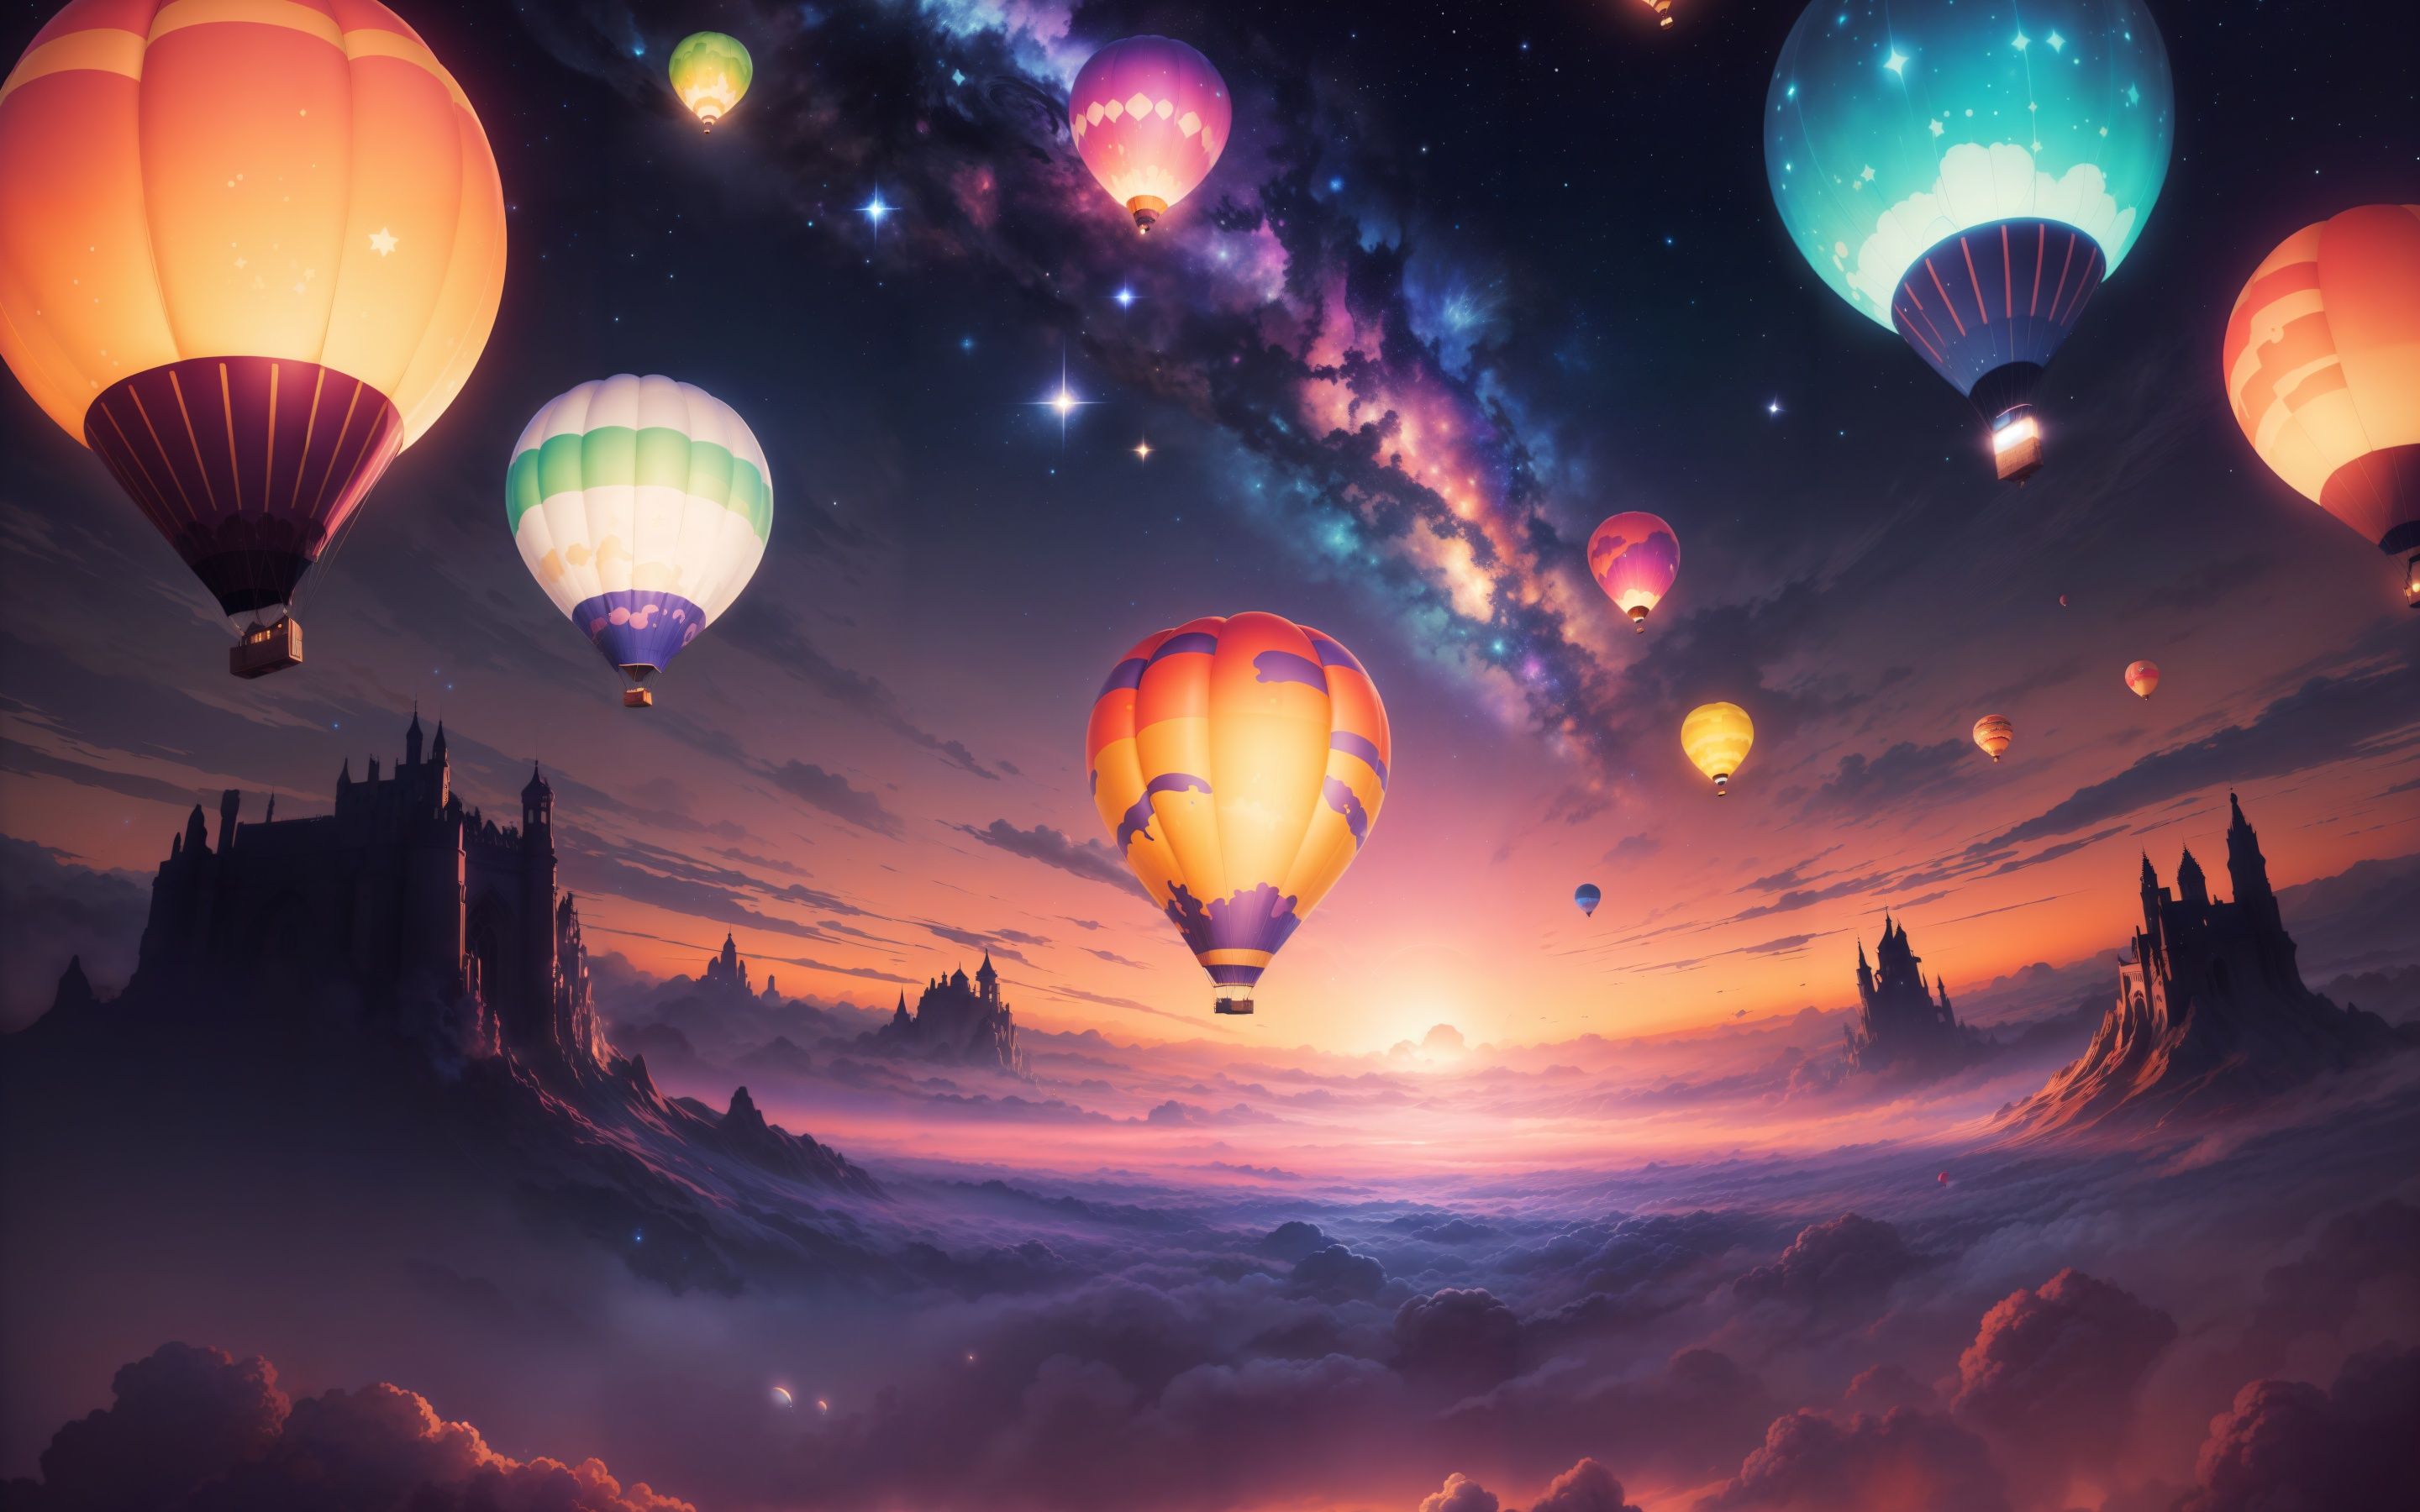 Hot air balloons flying over a city in the clouds - Balloons